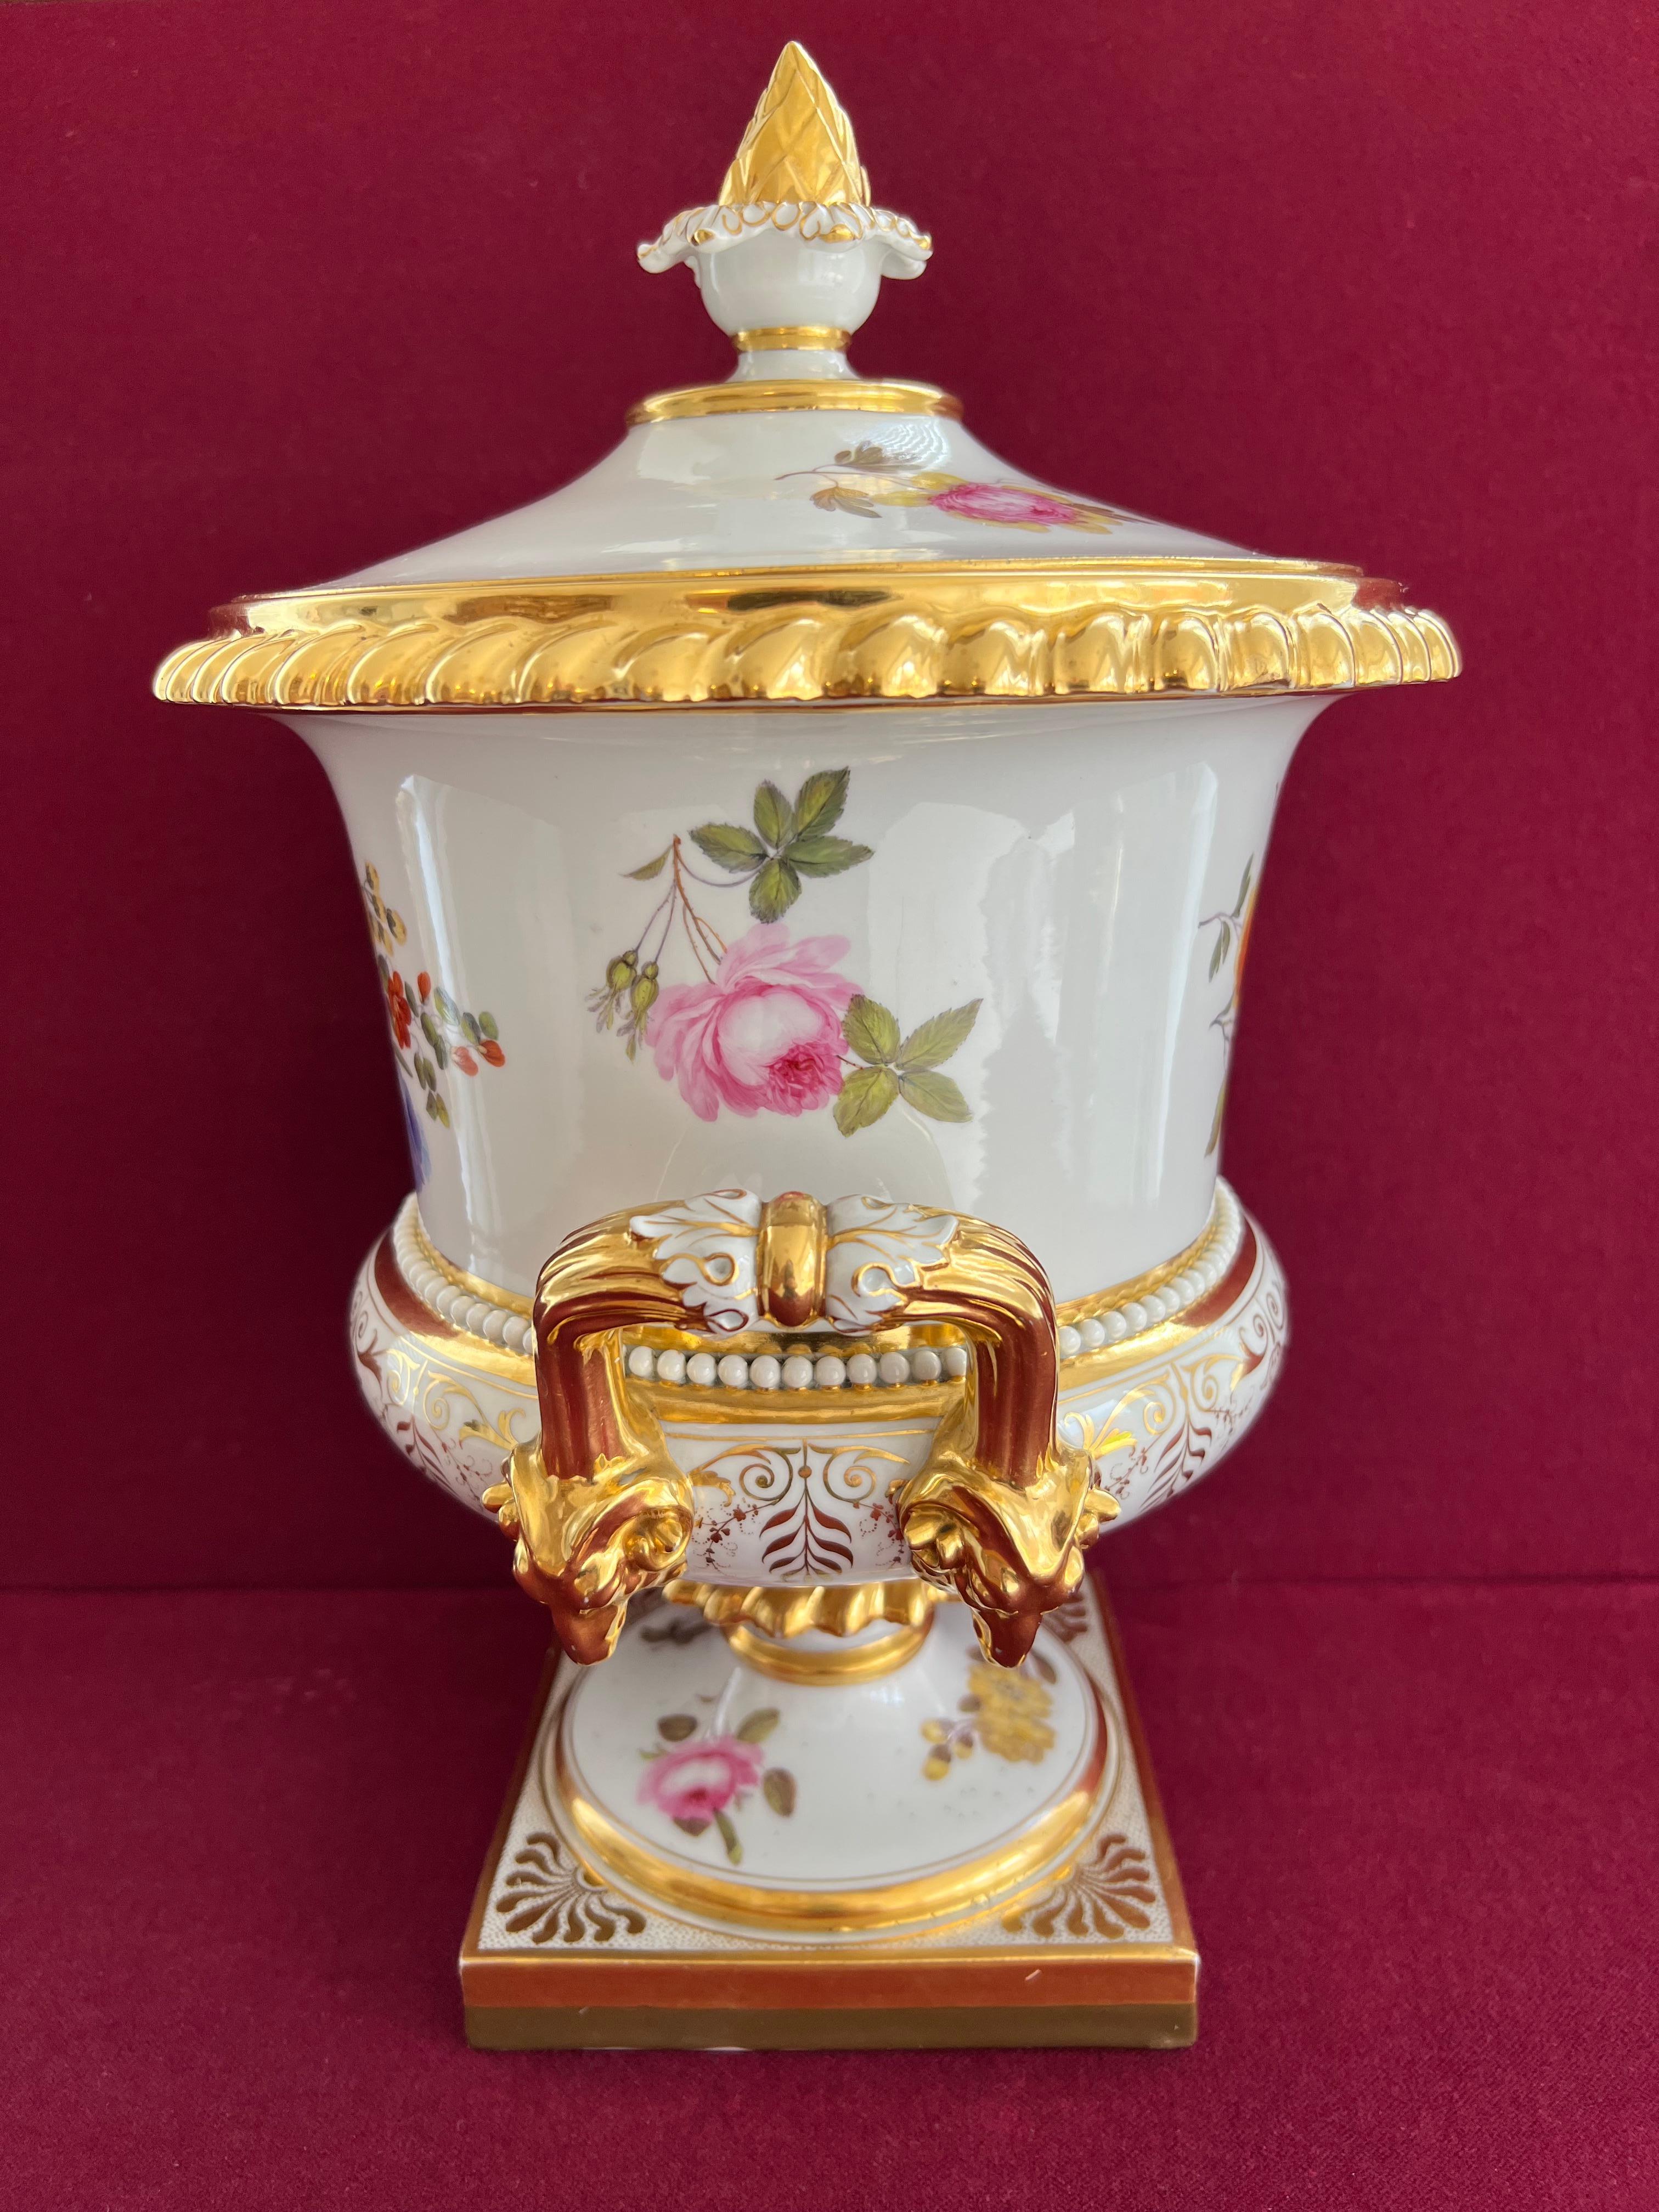 British Magnificent Flight, Barr and Barr Worcester Ice Pail, circa 1820-1830